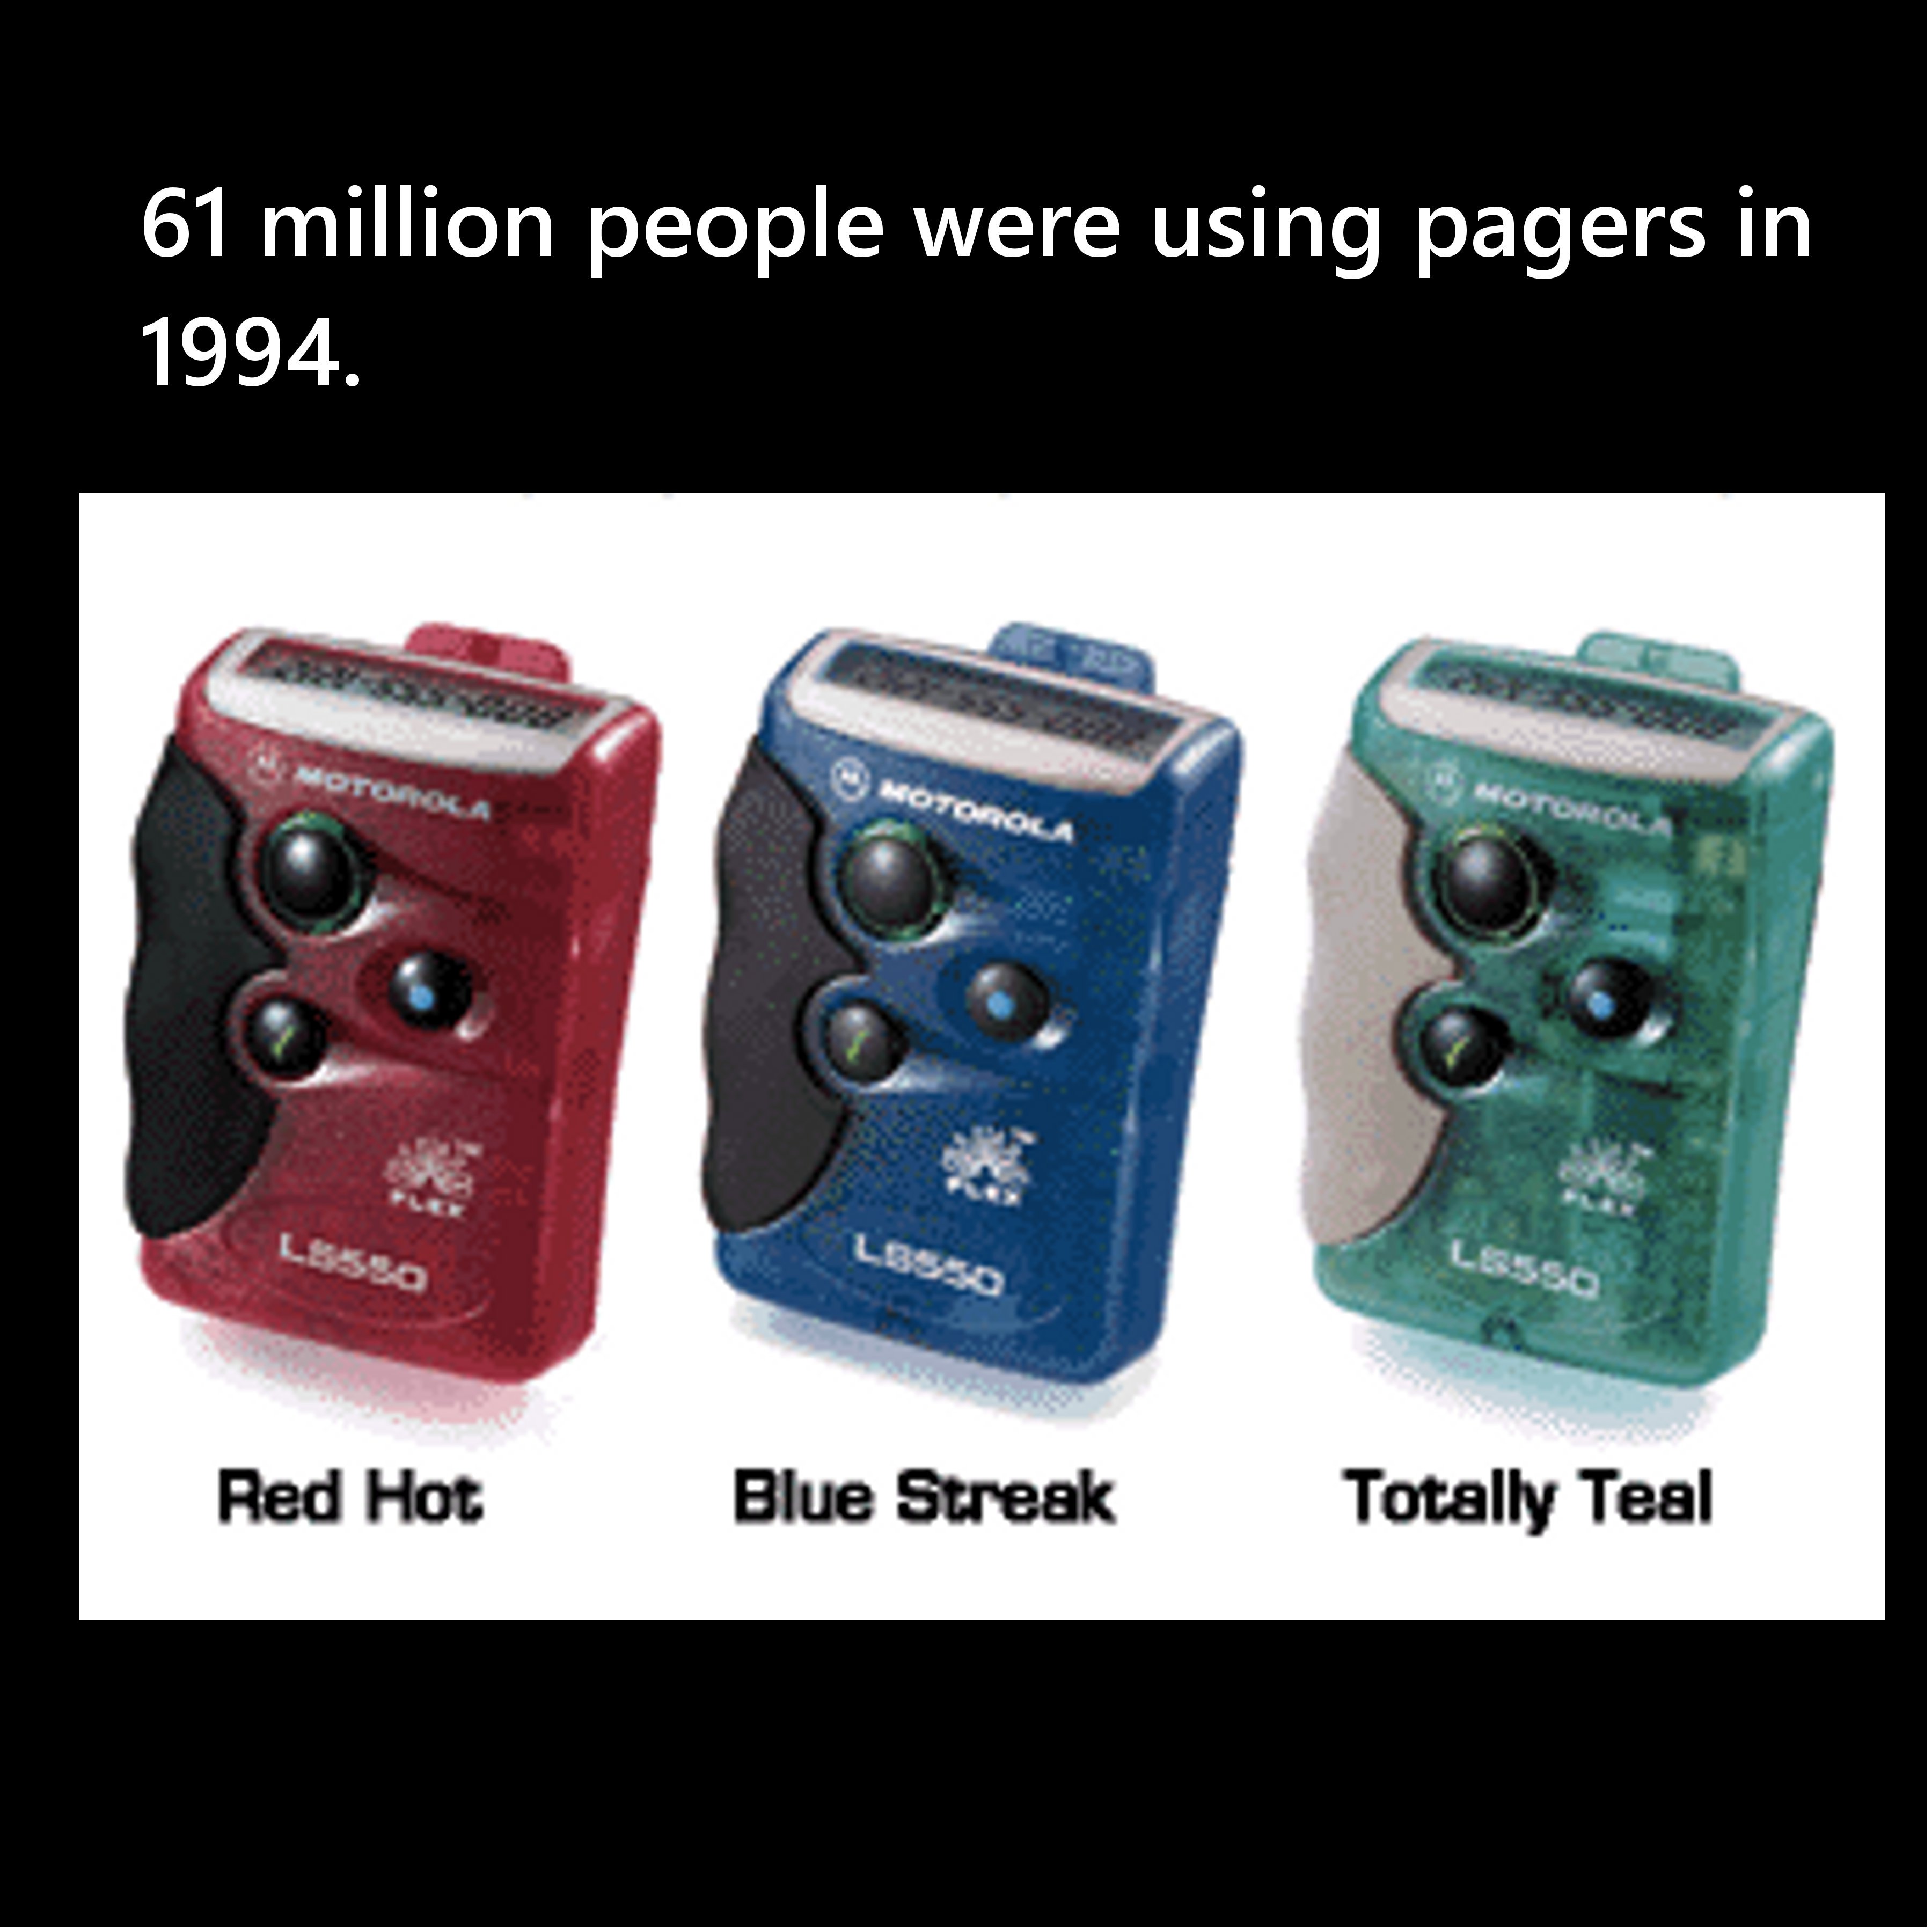 90s teen pager - 61 million people were using pagers in 1994. Motorola Motorola Moto Lesso Lesso Lsssc Red Hot Blue Streak Totally Teal